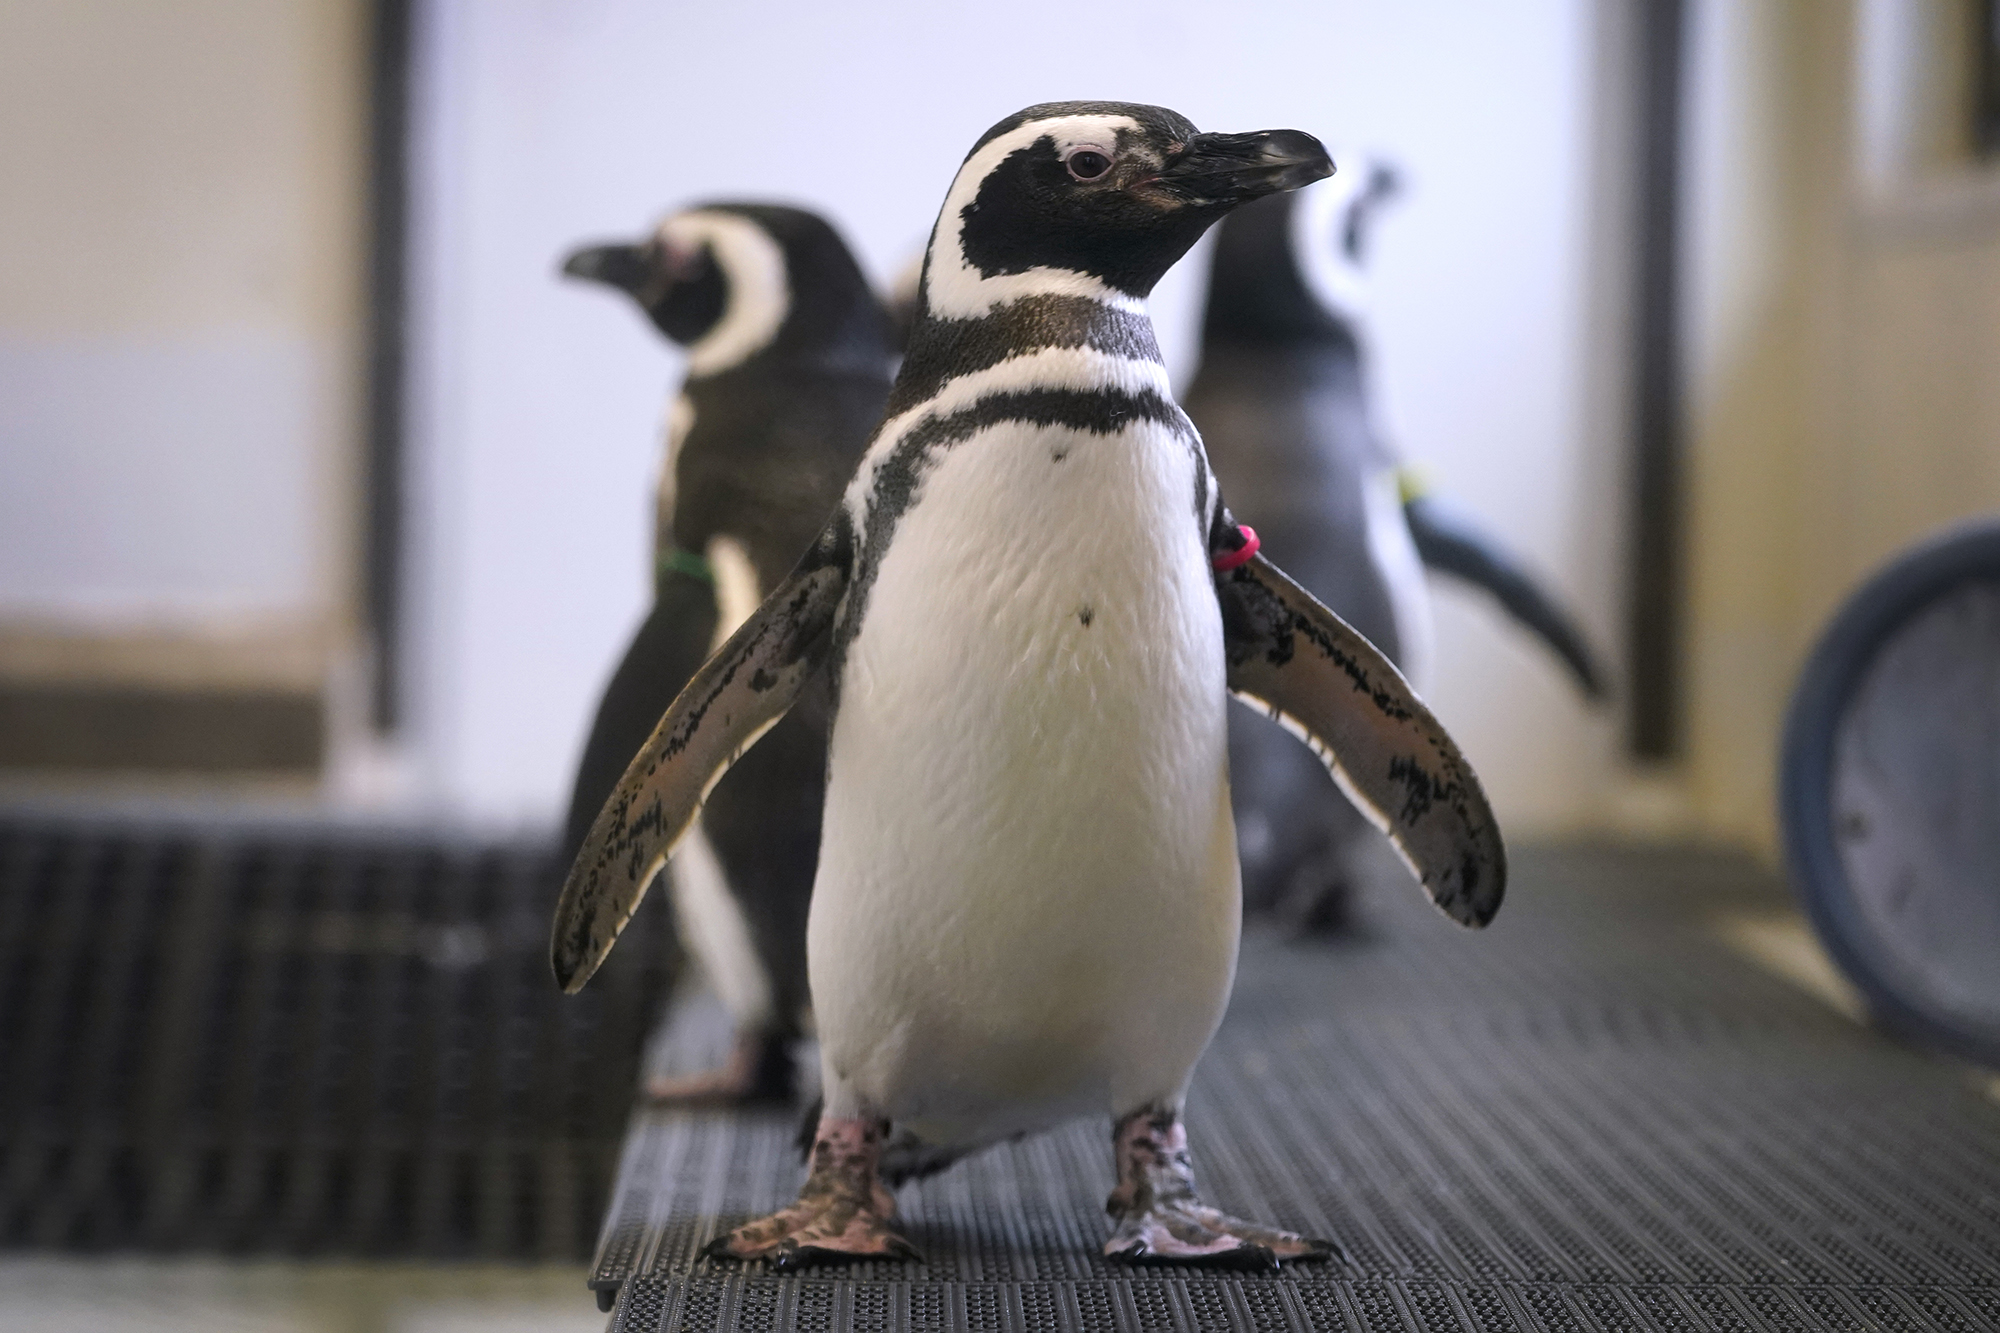 Magellan penguins stand in their enclosure at the Blank Park Zoo, Tuesday, April 5, 2022, in Des Moines, Iowa